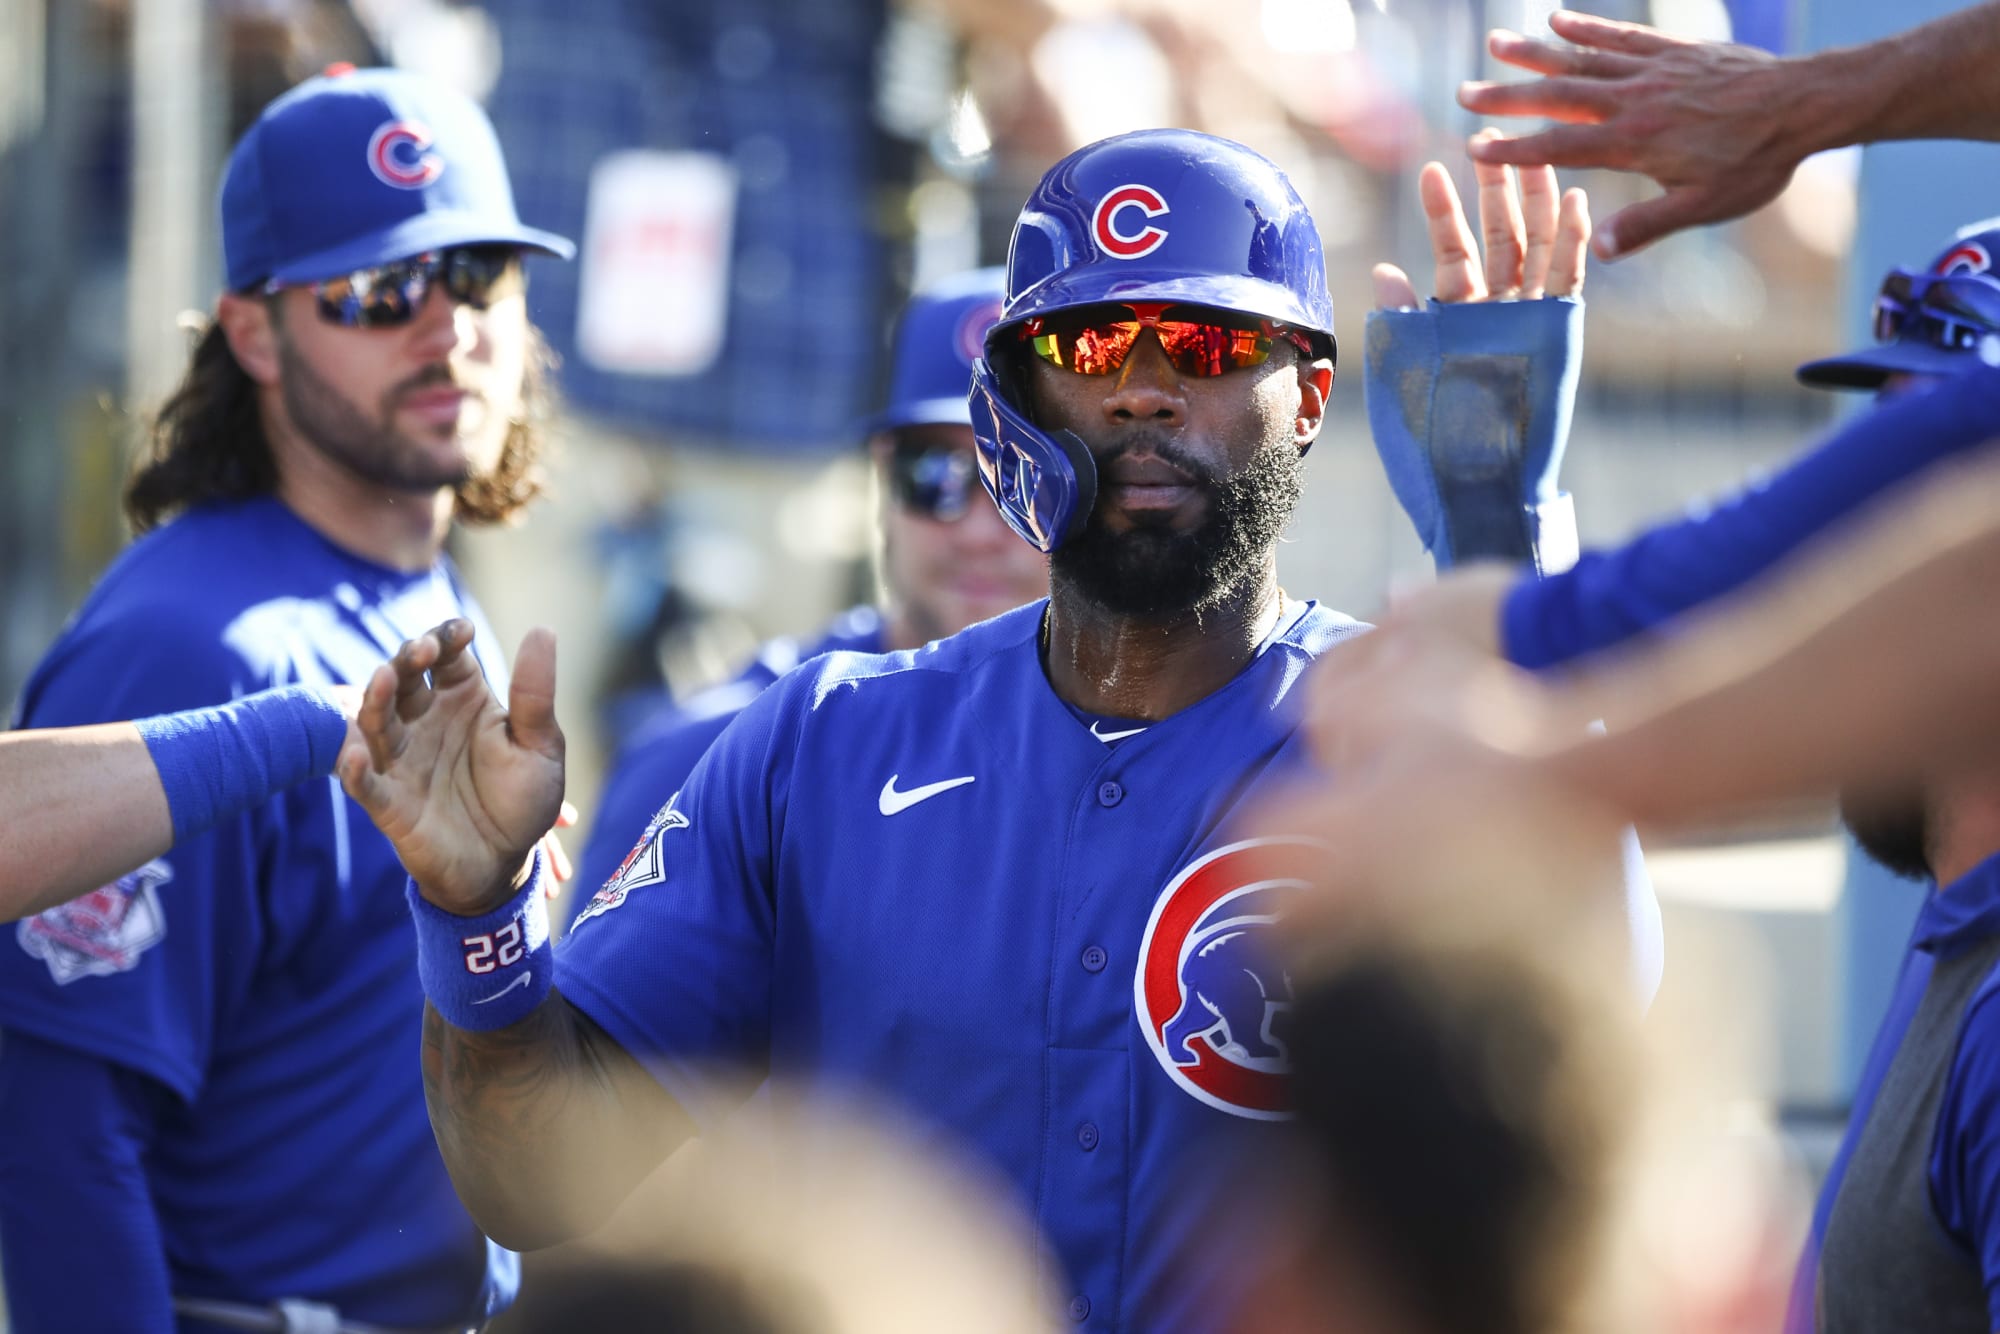 If Jason Heyward doesn't hit in 2022, will the Cubs decide to cut ties?